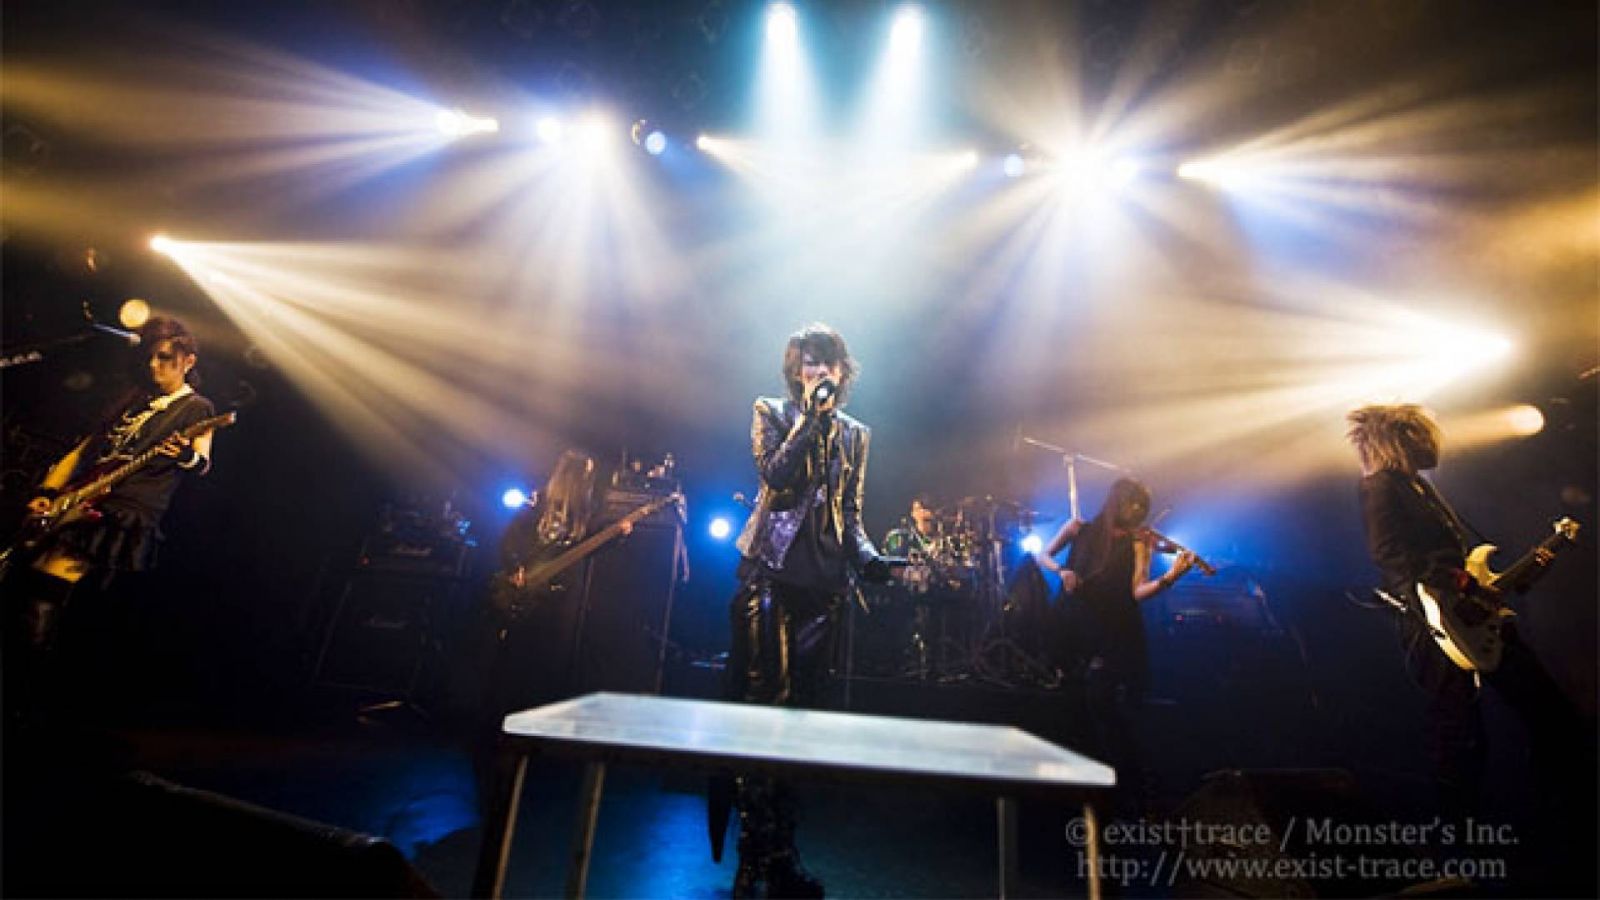 exist†trace Live DVD and One-Man Tour © exist†trace/Monster's Inc.